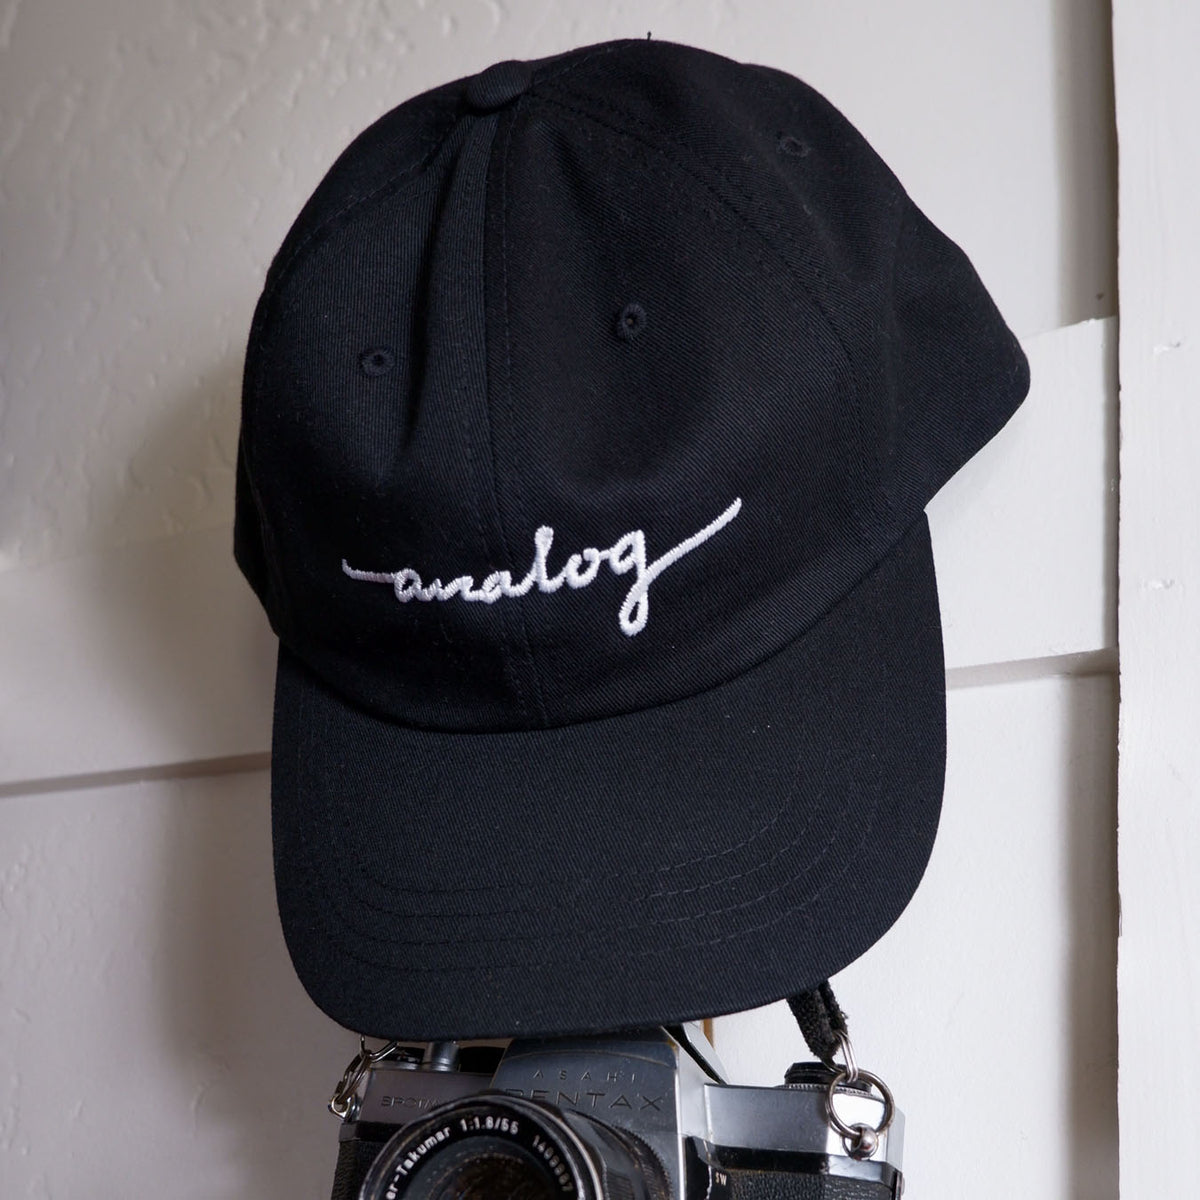 An Analog Hat resting on a camera.